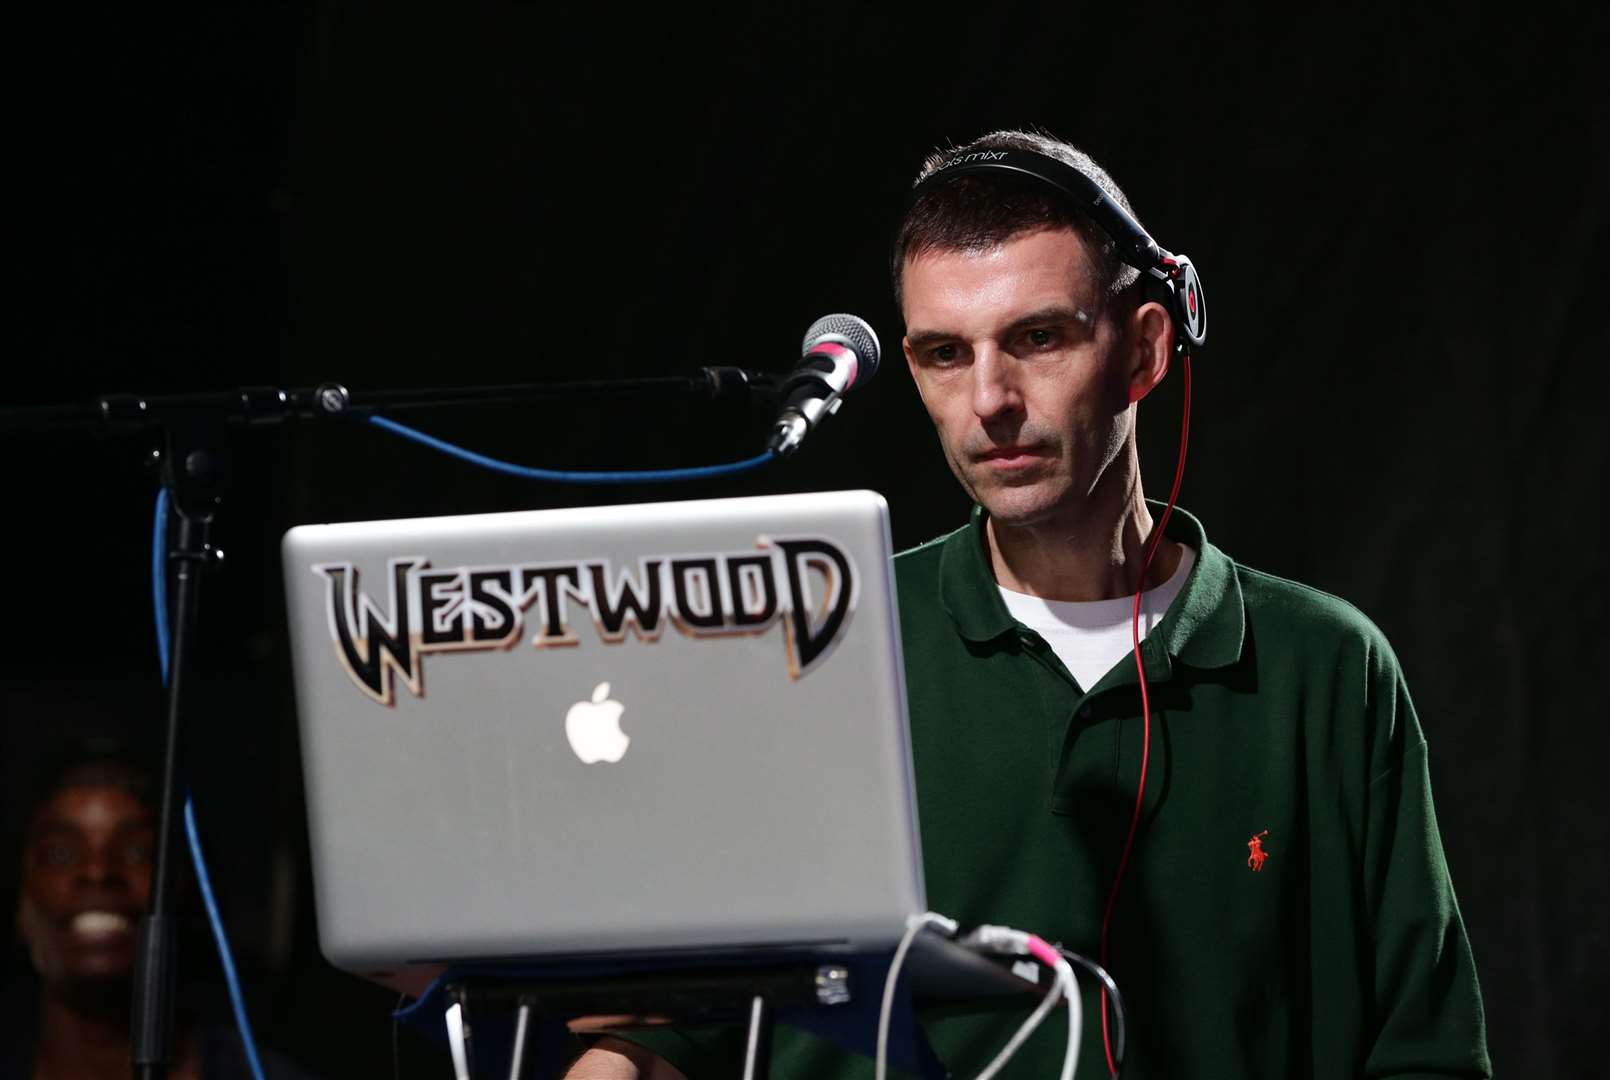 Westwood has previously denied wrongdoing (PA)